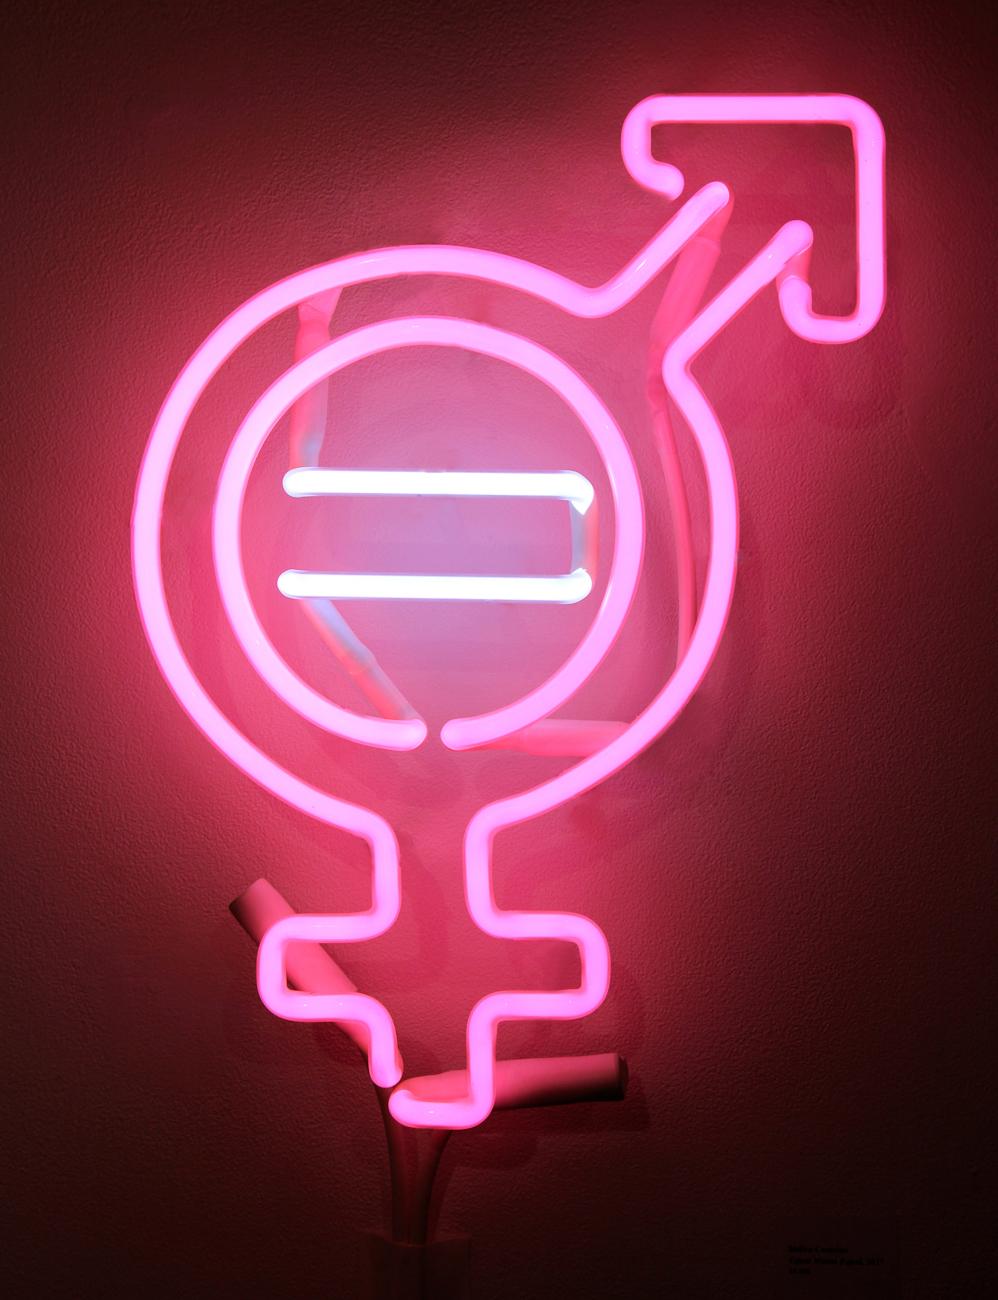 Equal Means Equal, Neon Sculpture Mounted on Plexiglass, Equality, Feminism - Art by Indira Cesarine